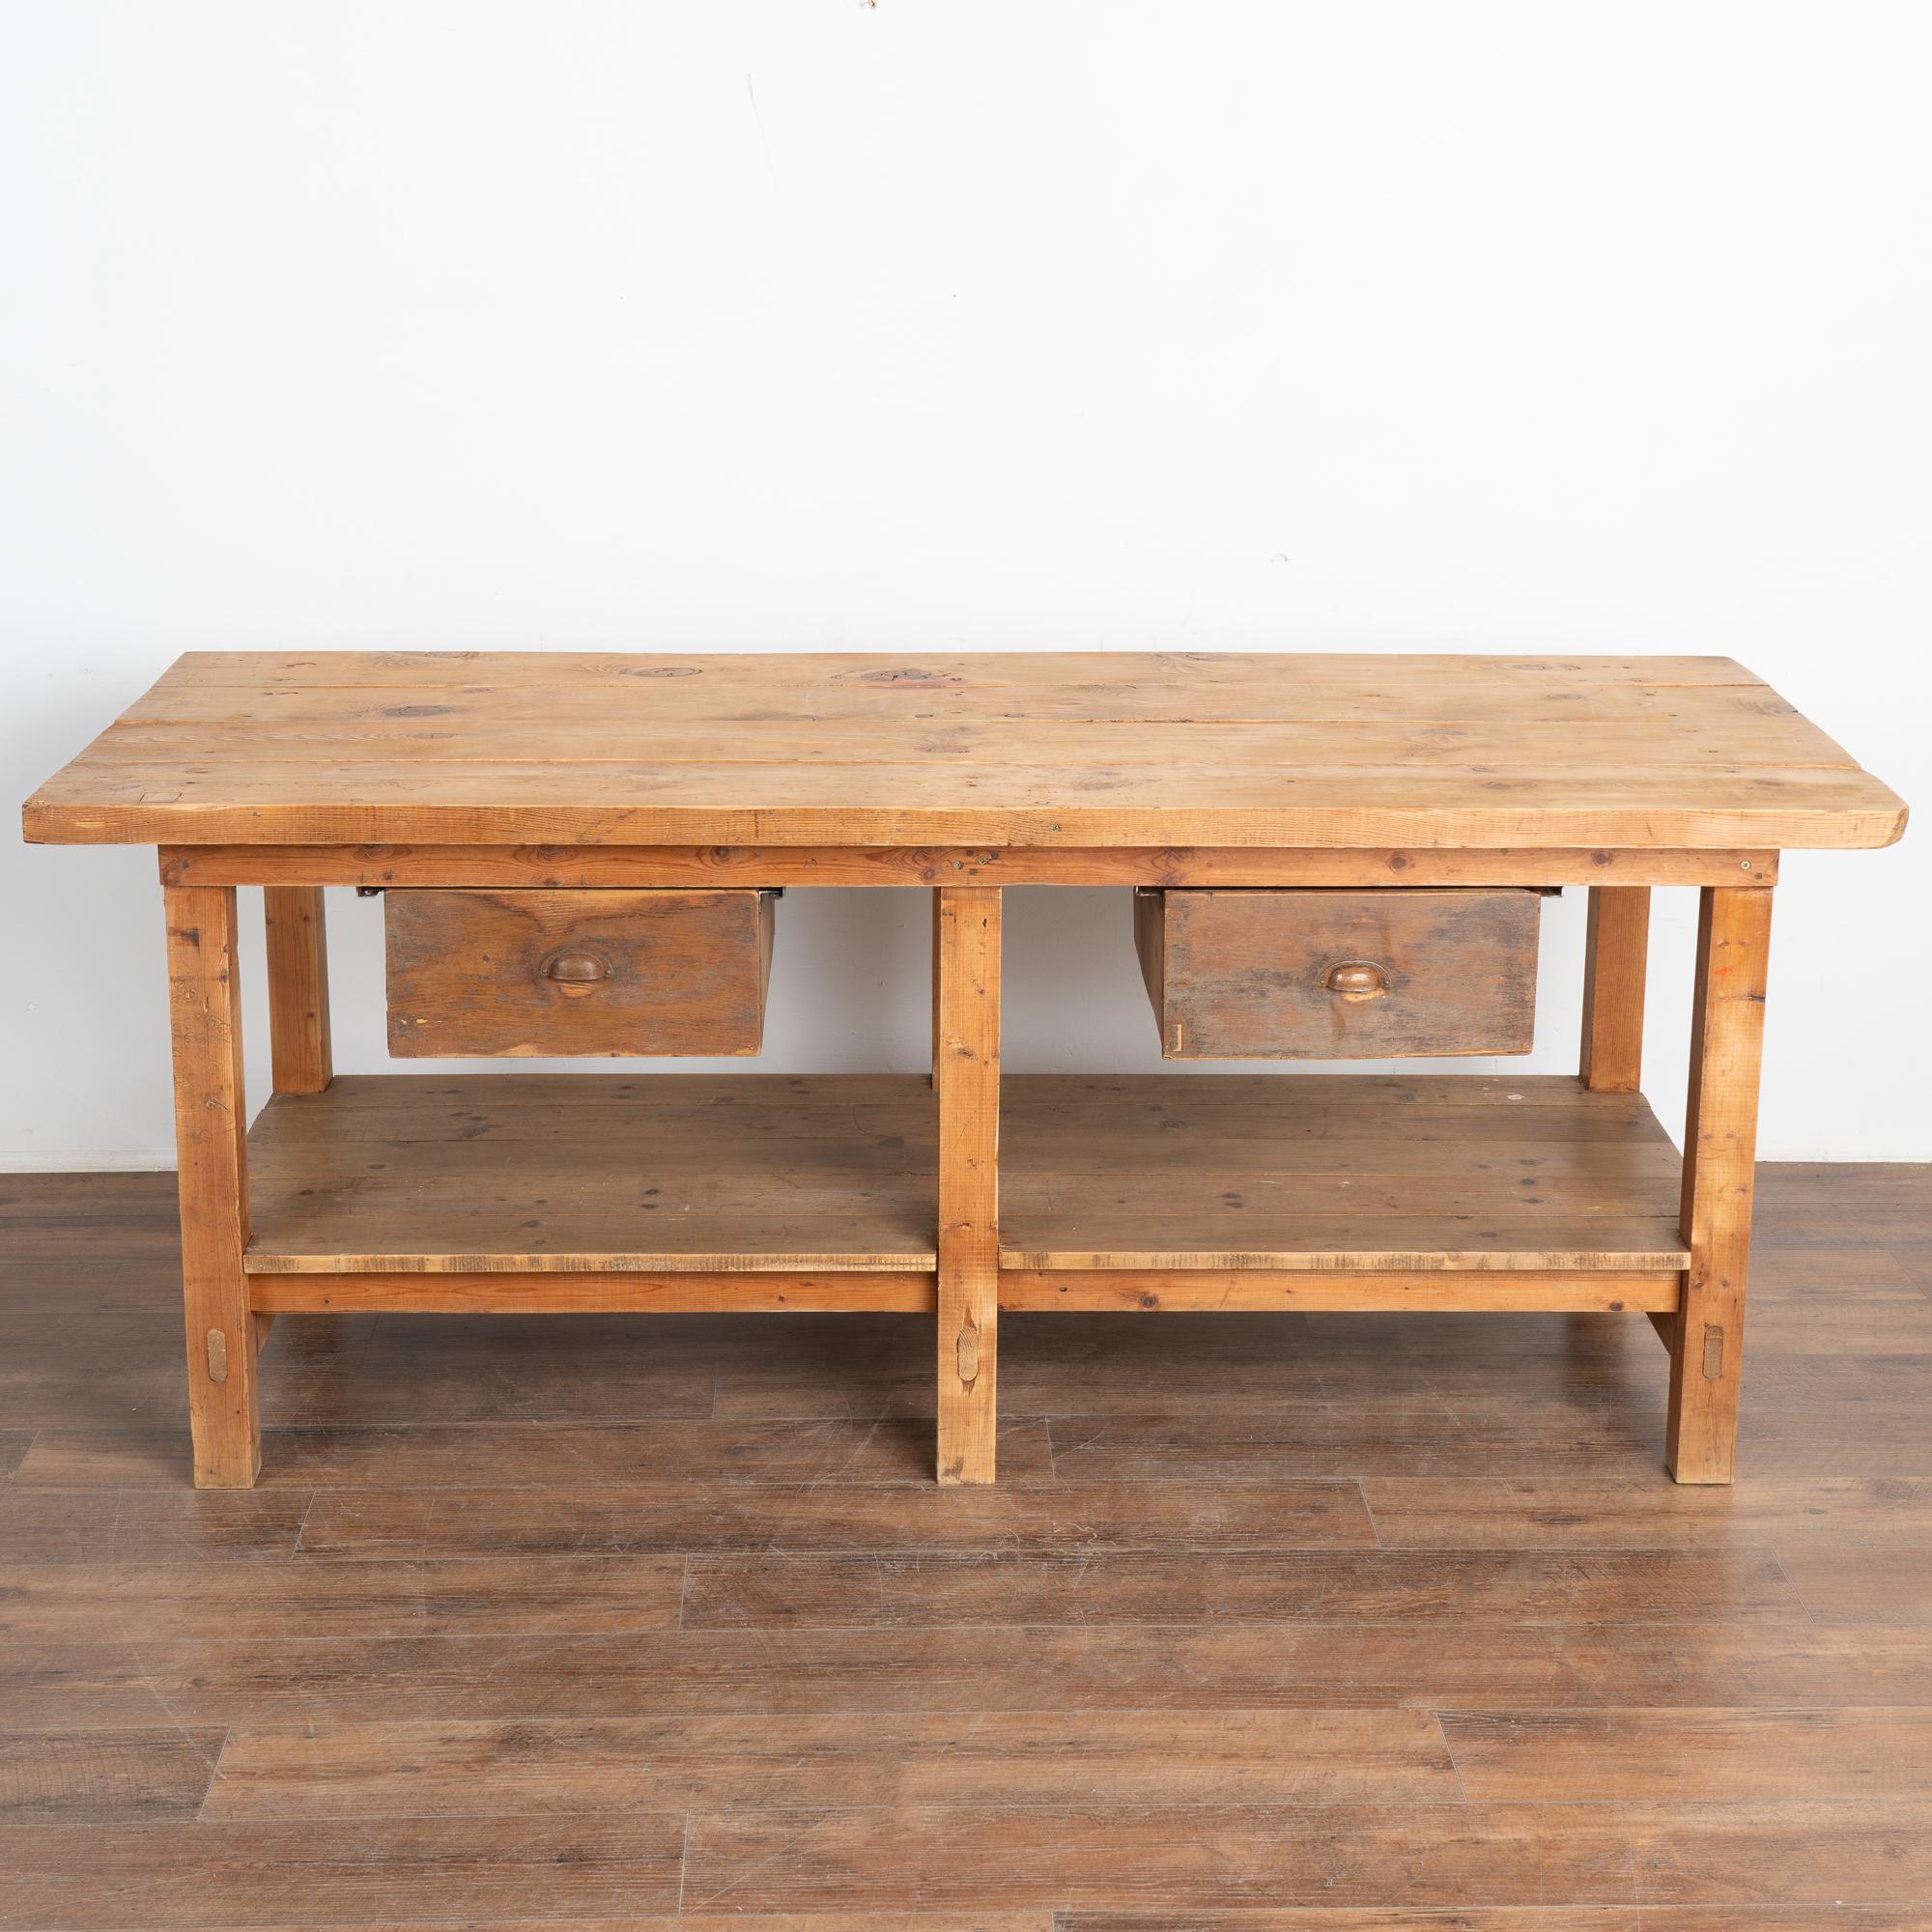 20th Century Rustic Work Table With Two Drawers and Shelf, Kitchen Island circa 1920